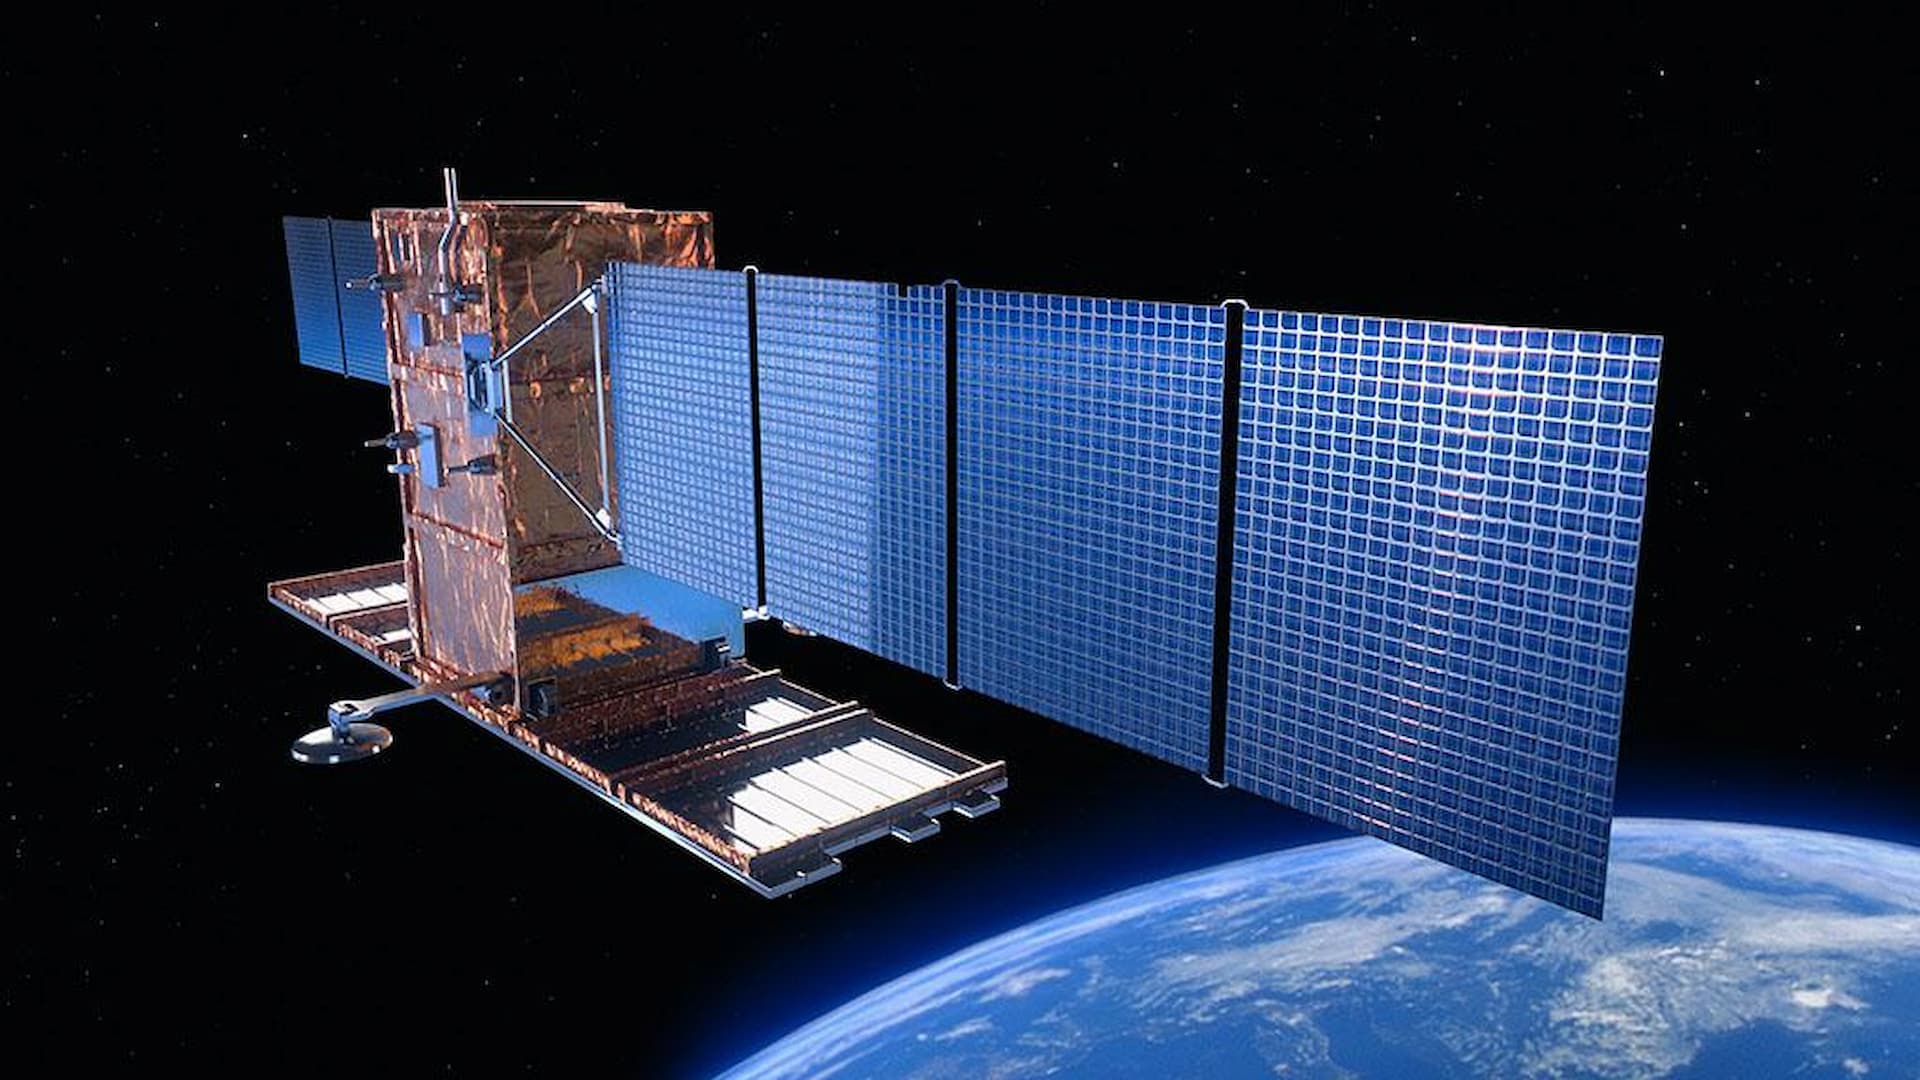 The second COSMO-SkyMed Second Generation (CSG) satellite becomes operational and strengthens even more the established role and contribution of Italy in the field of Earth observation